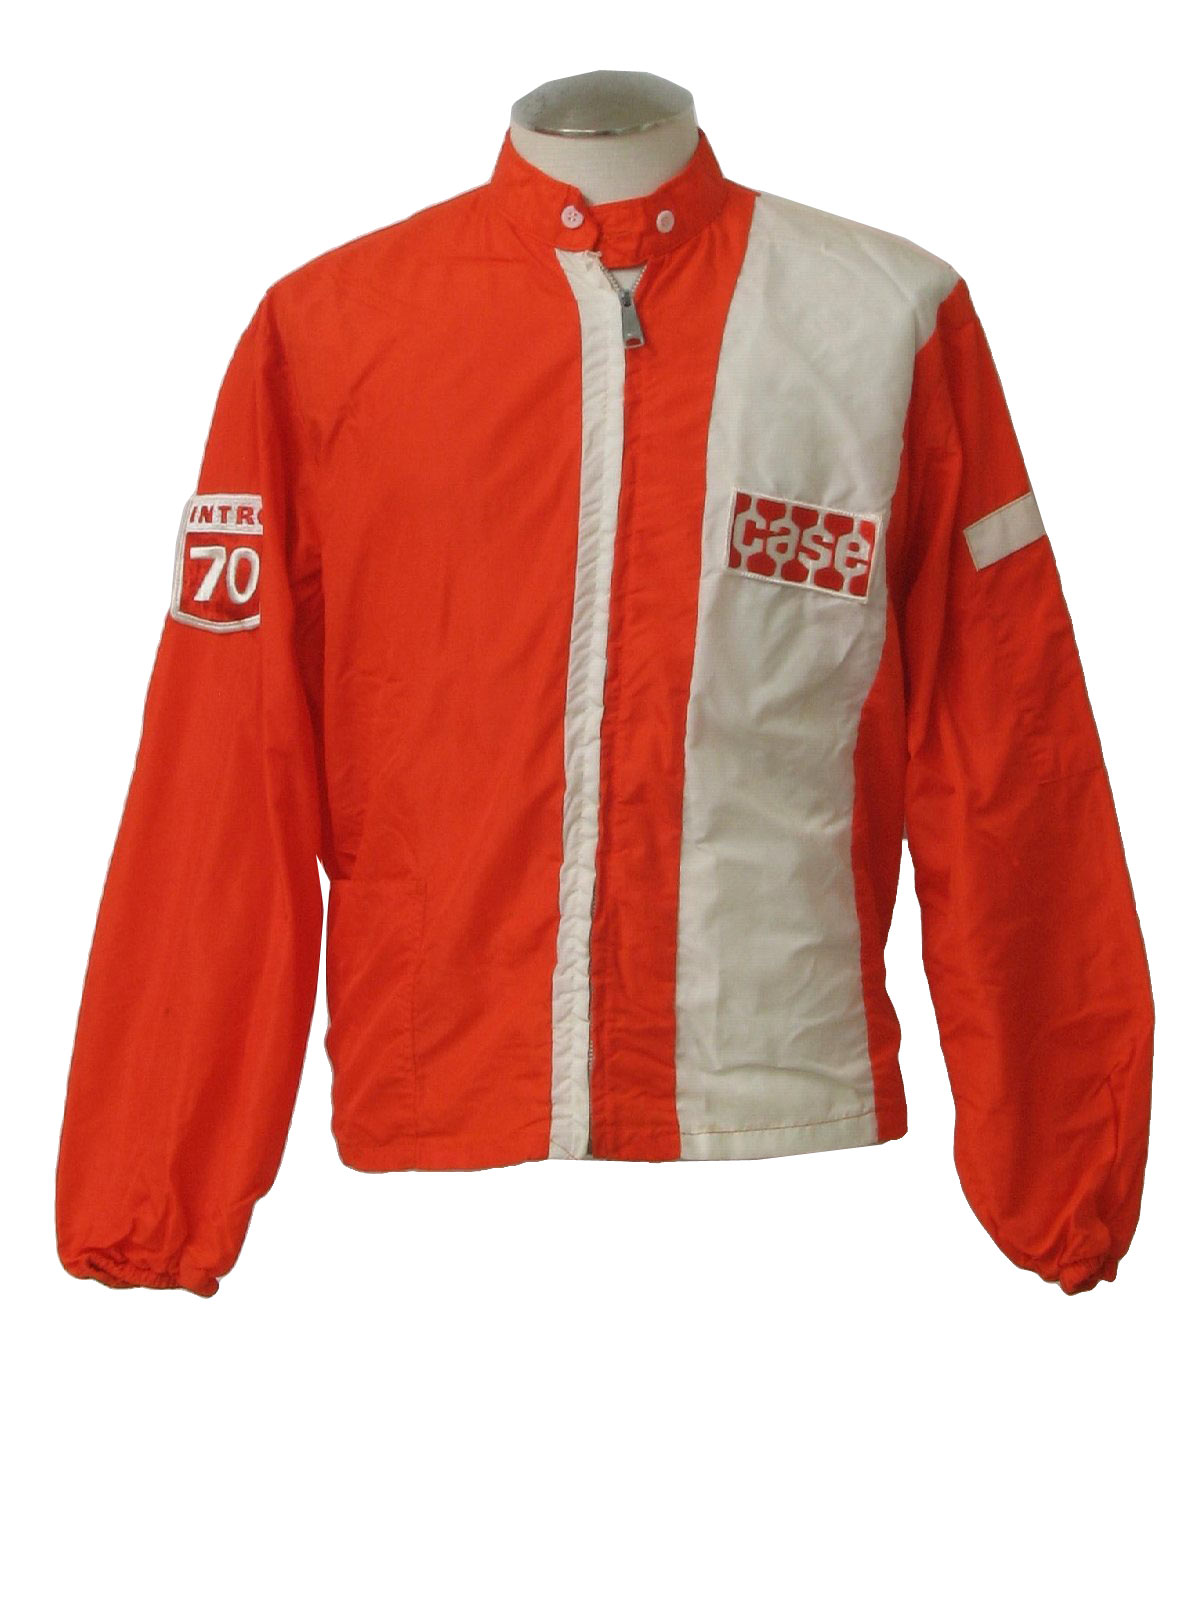 Vintage 60s Jacket: 60s -Louisville Sportswear- Mens orange and cream nylon  windbreaker style racing jacket. Wide and narrow stripe details on the  front and on the left sleeve pocket, a CASE logo